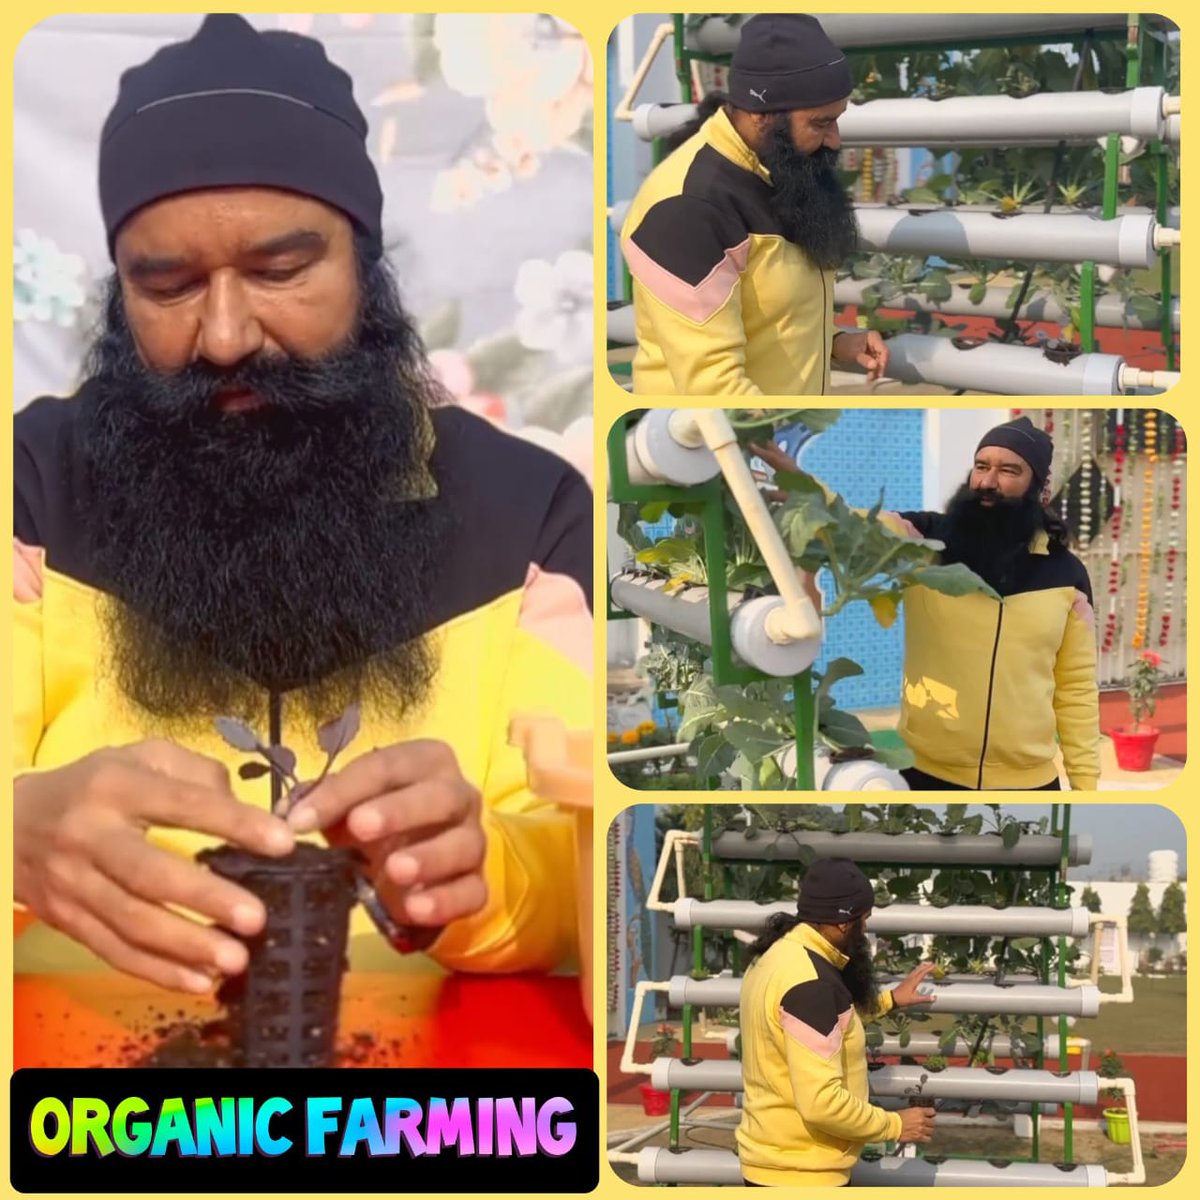 Organic #FarmingTips are the necessity of this age. #AgricultureTips for #OrganicFarming by Saint MSG are really unique. By adopting their #Farming techniques anyone can take much more crop yield.
#FarmingTipsBySaintMSG
 #ScientificFarming  
 #AgricultureTipsByMSG #DeraSachaSauda